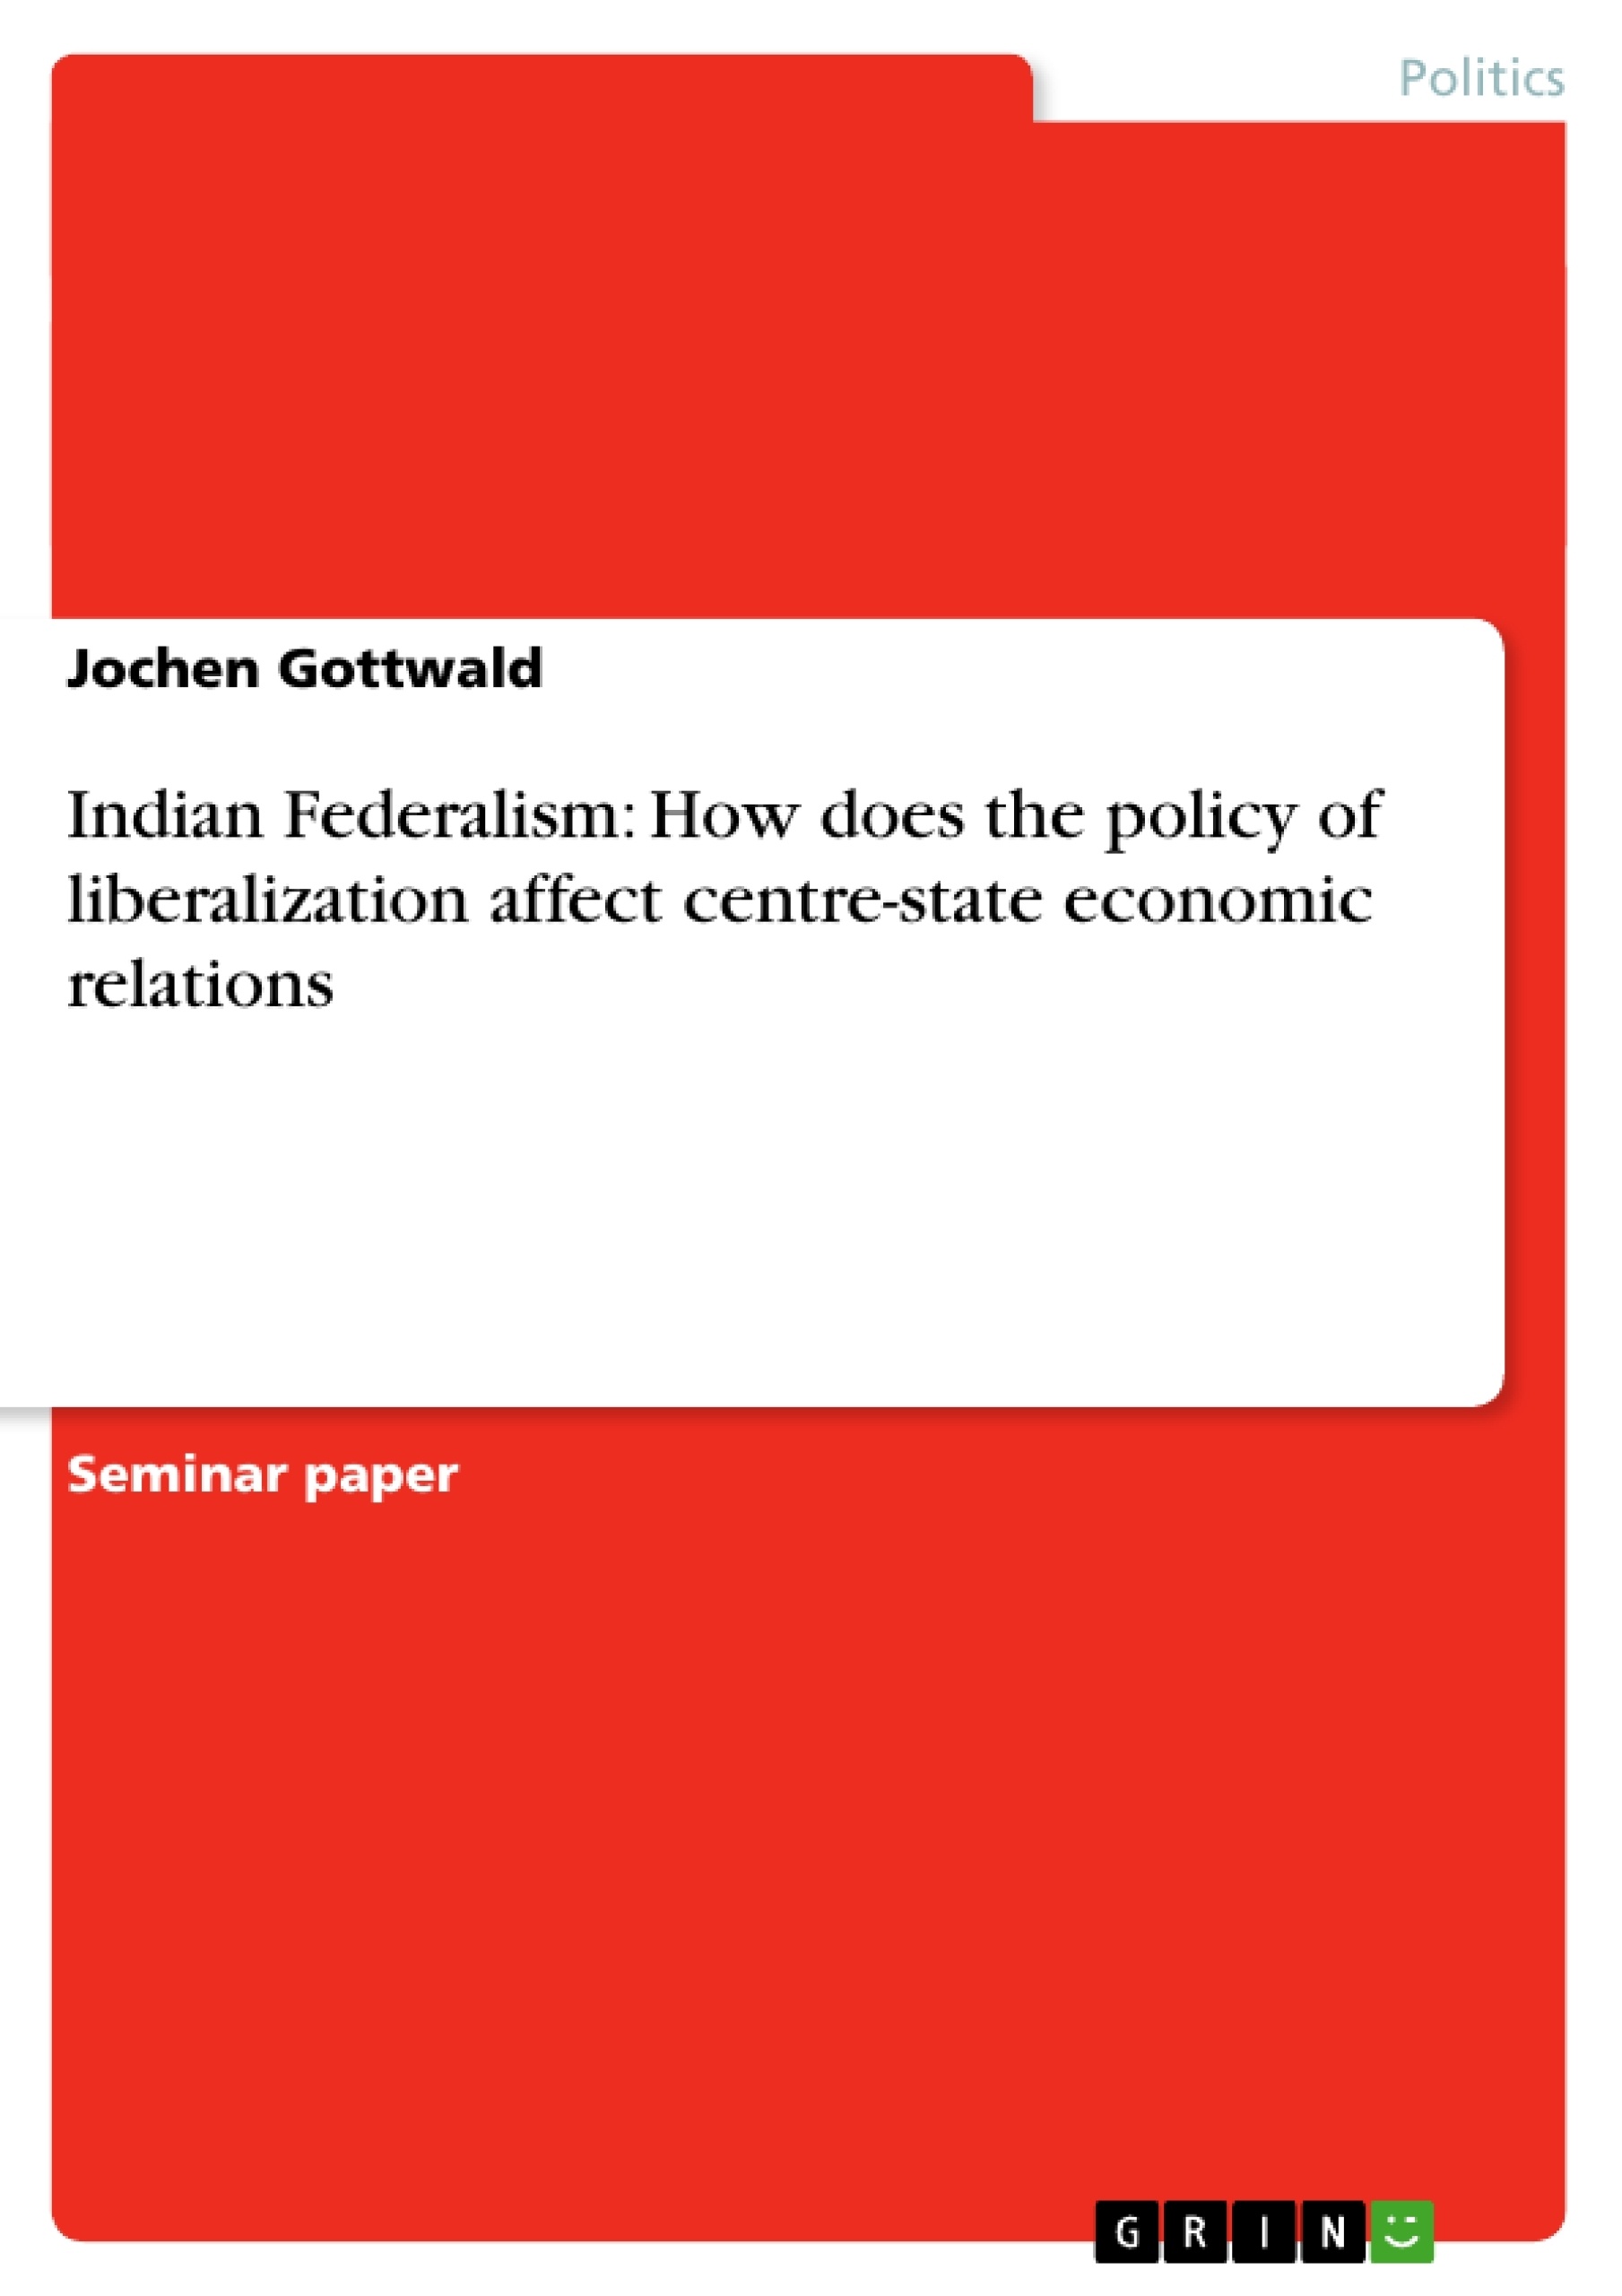 Titre: Indian Federalism: How does the policy of liberalization affect centre-state economic relations